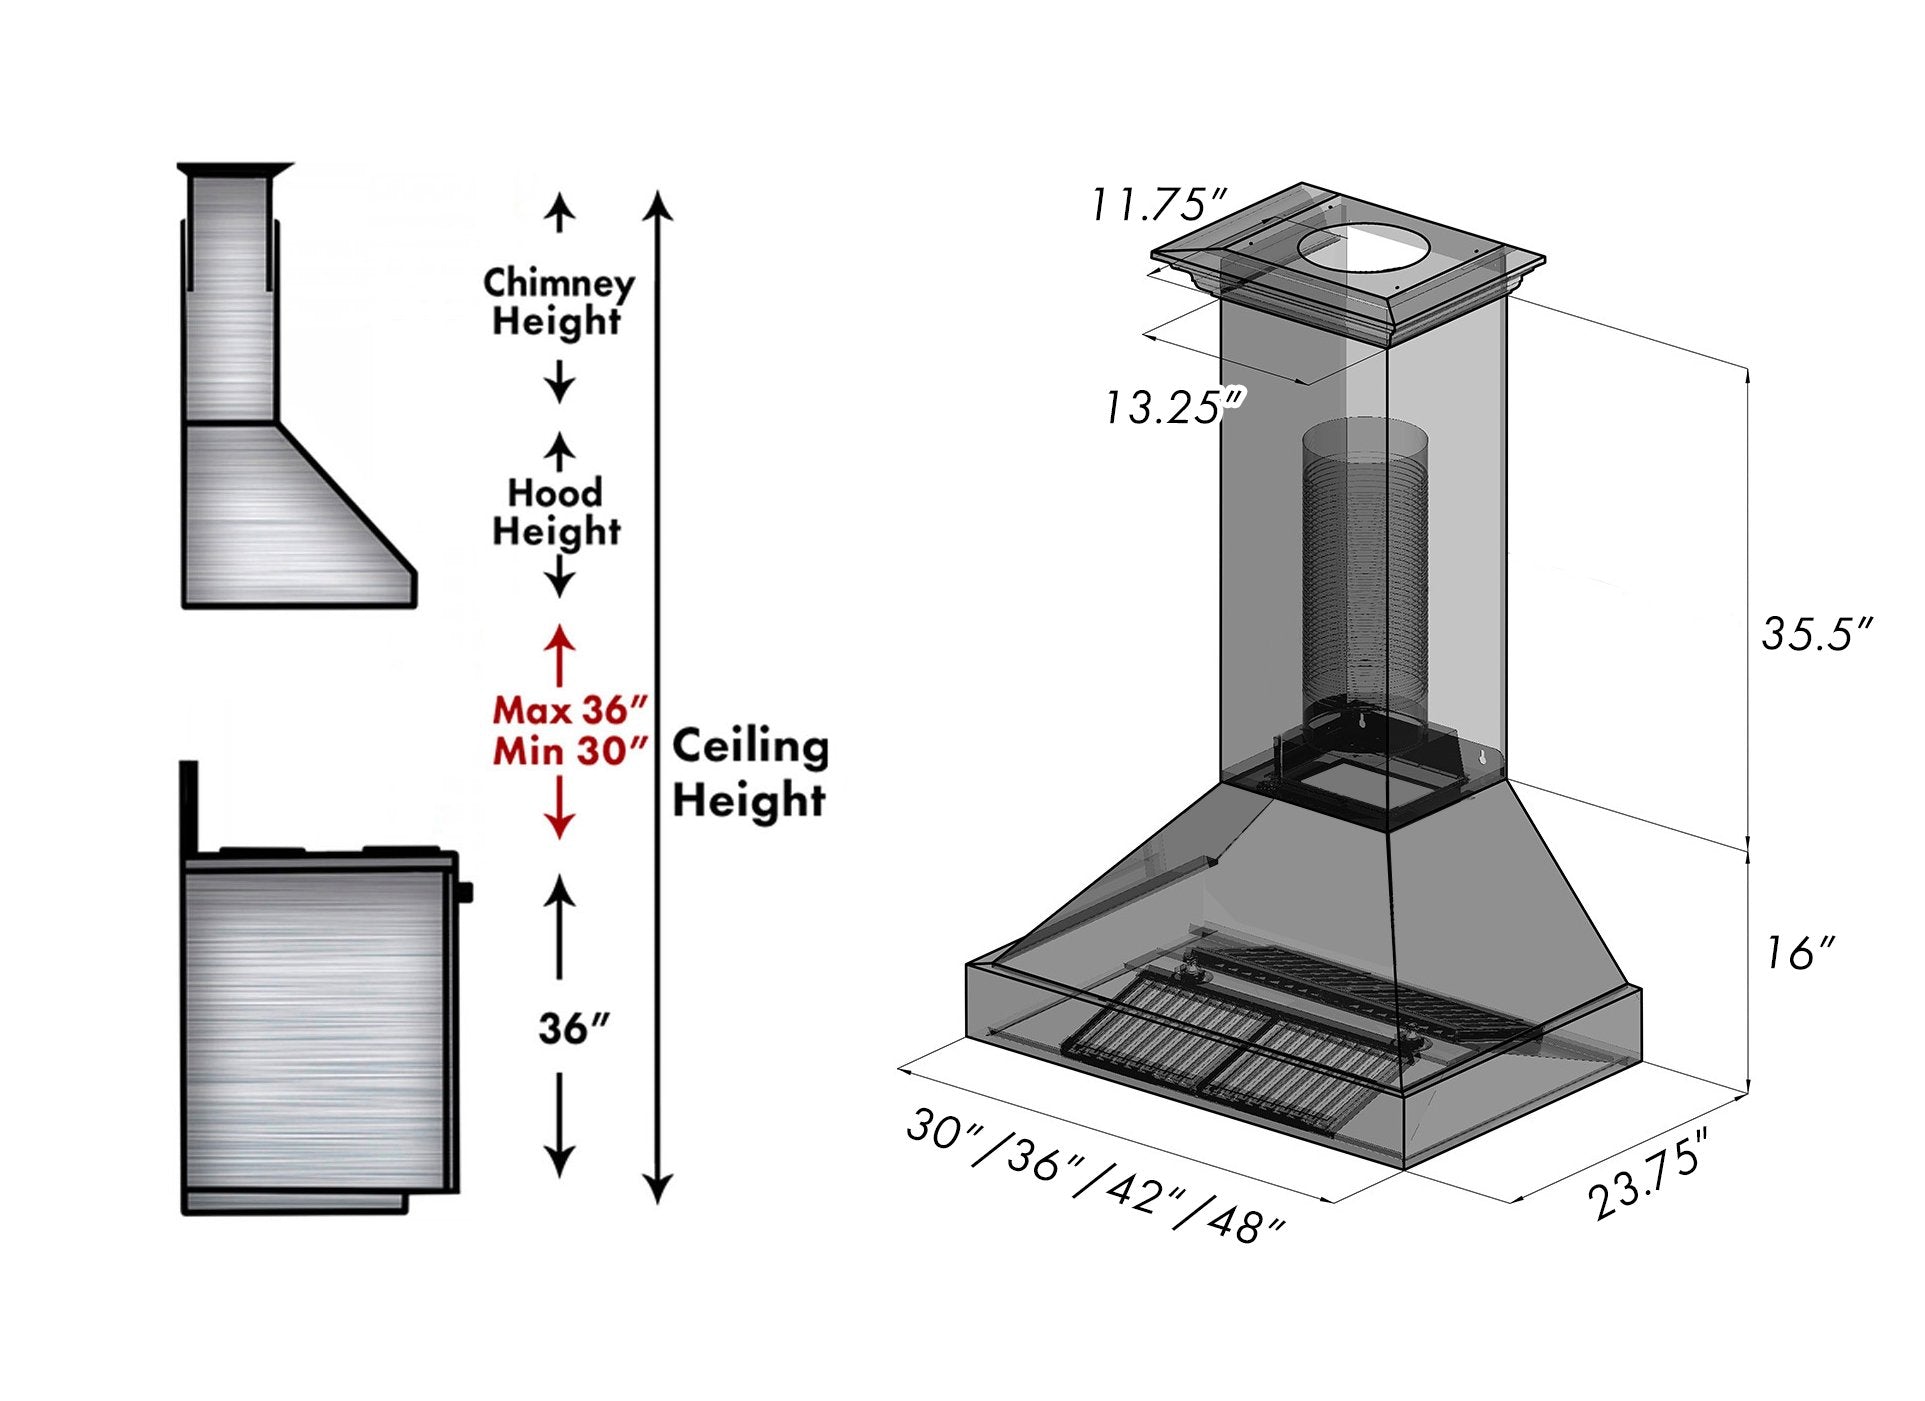 ZLINE Ducted Fingerprint Resistant Stainless Steel Range Hood with Hand-Hammered Copper Shell (8654HH) dimensional diagram with measurements.